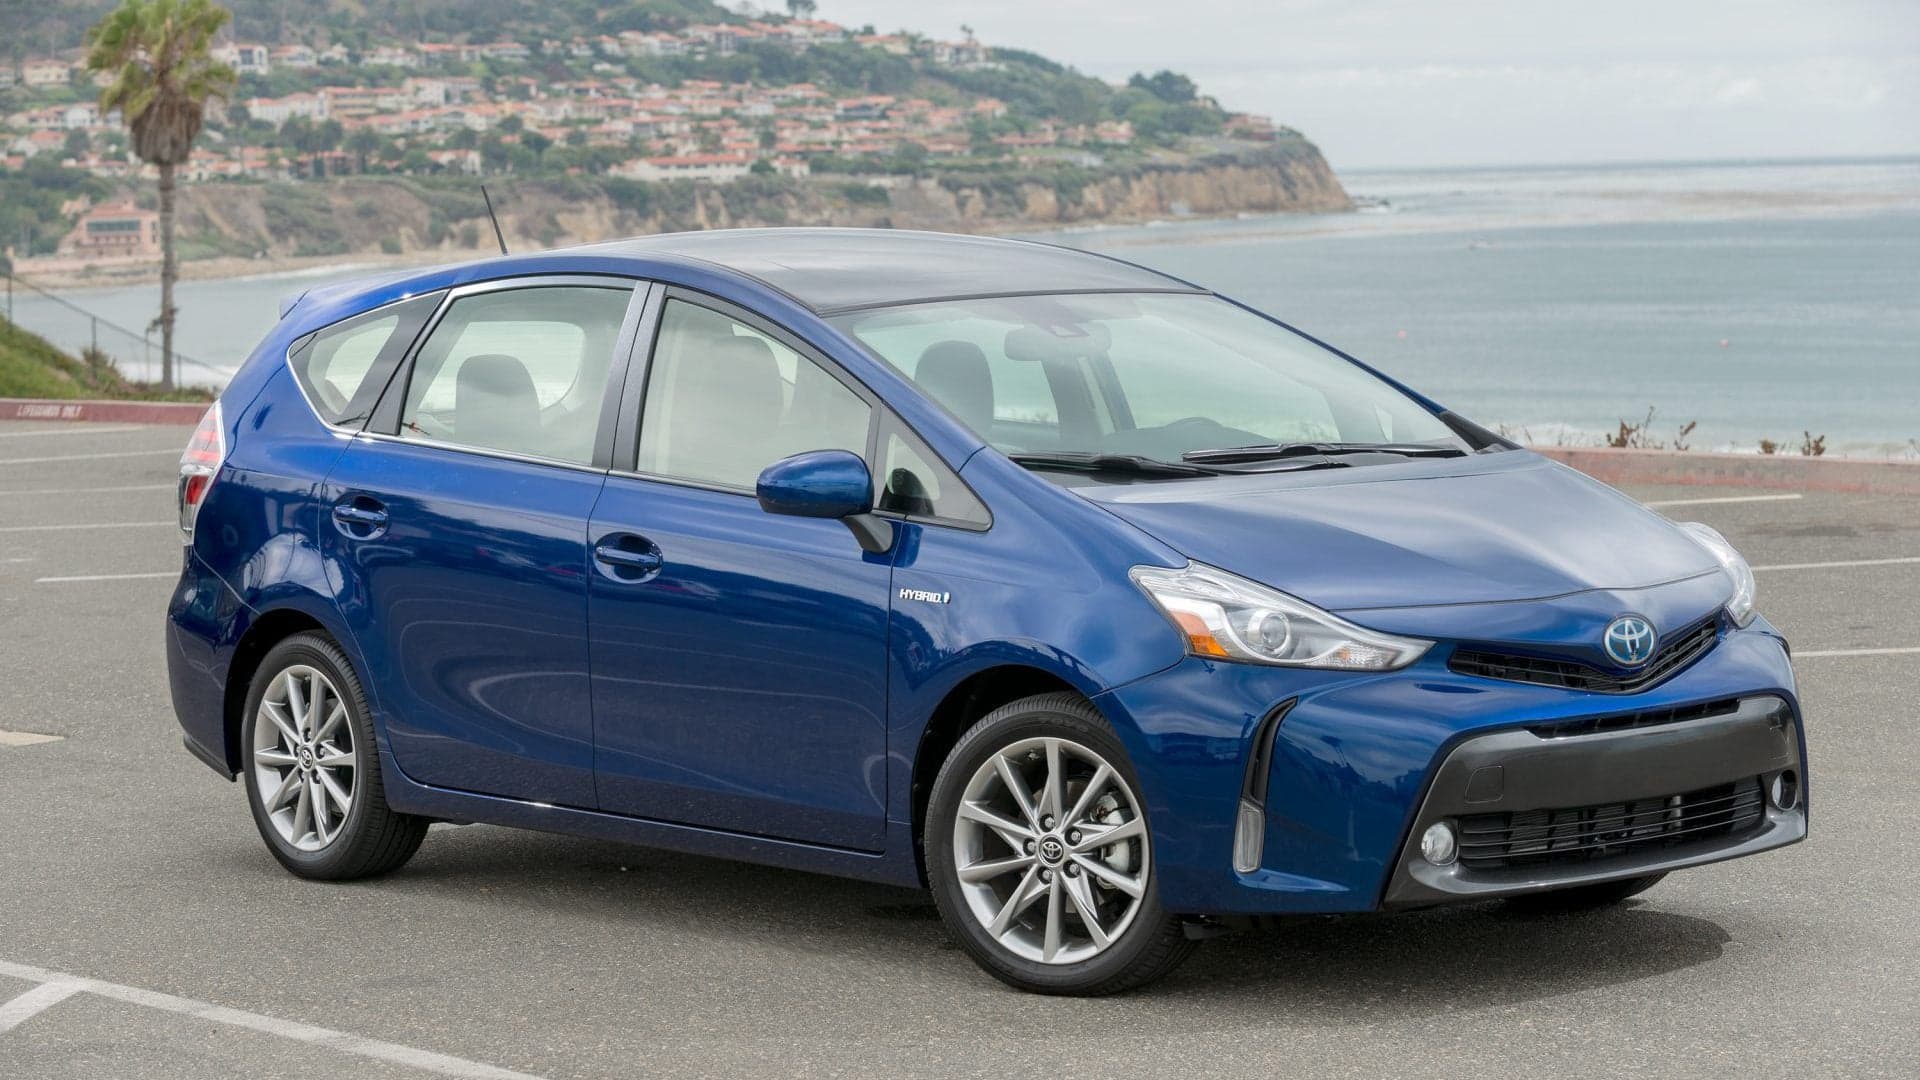 California Dealer Refuses to Sell Its $1M-Worth of Parked Prius Models, Sues Toyota